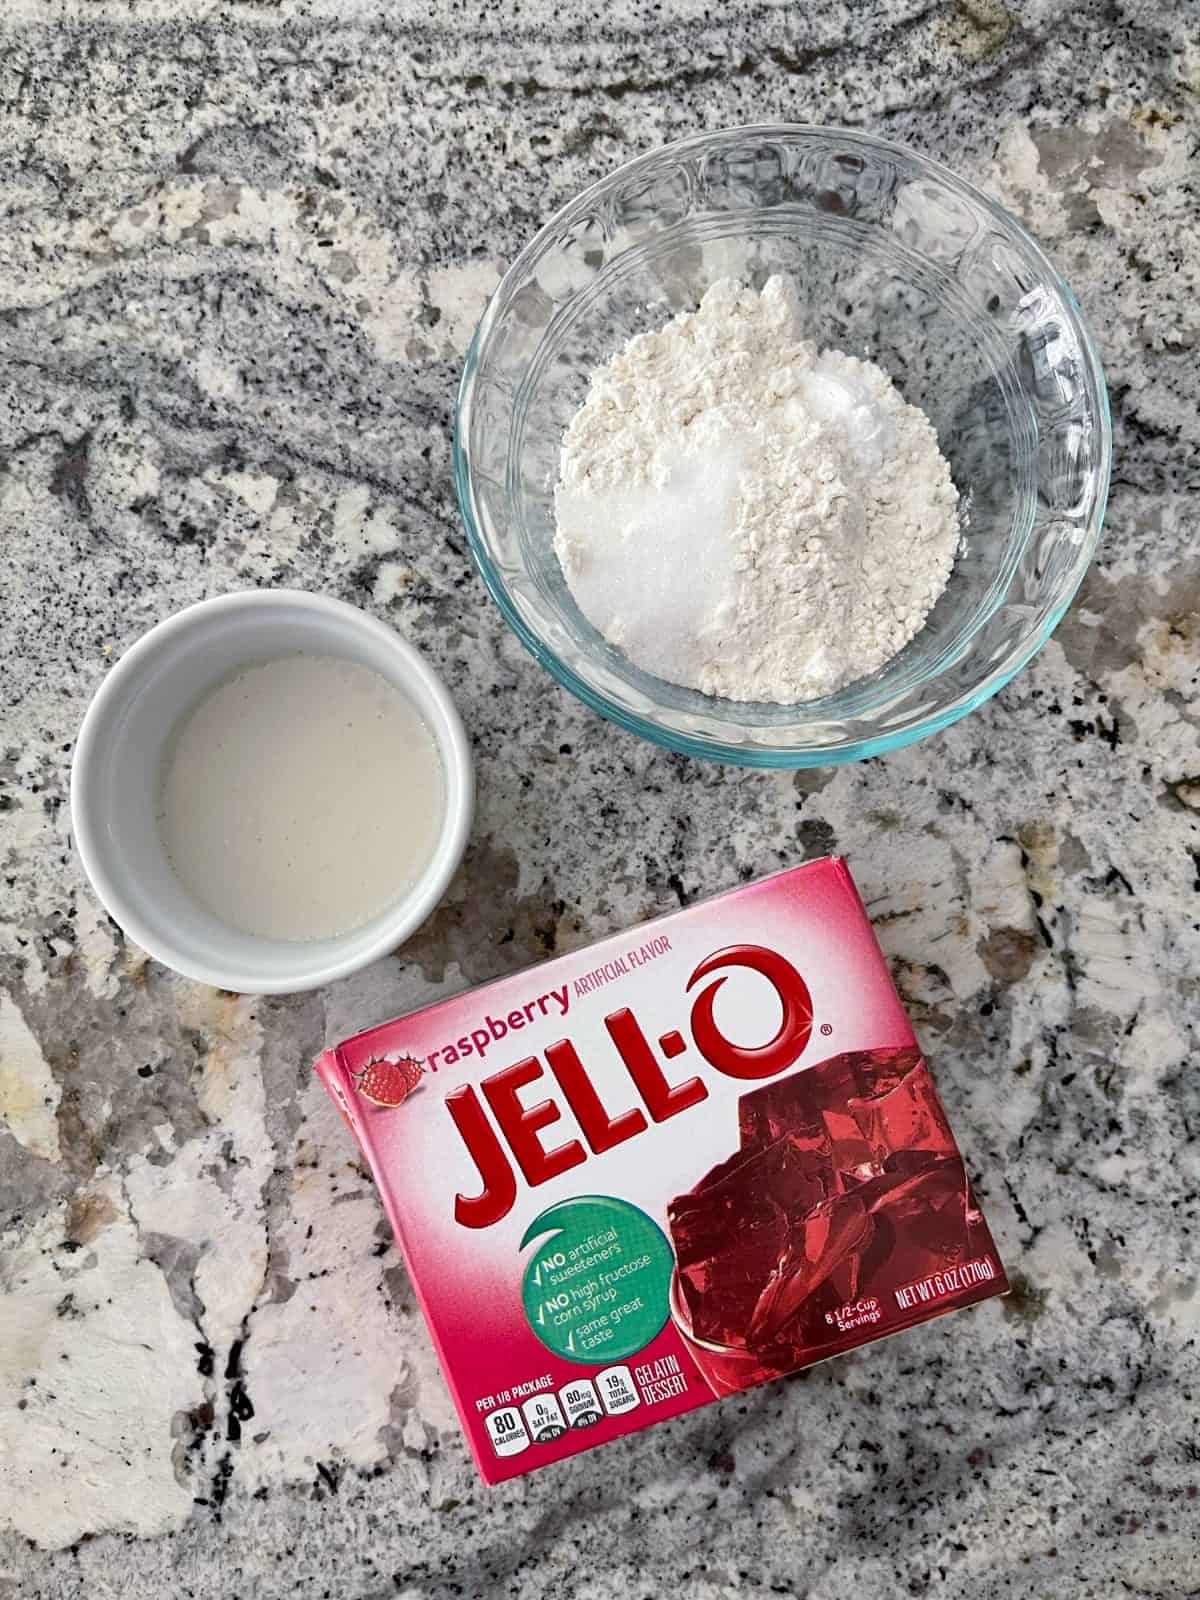 Ingredients including unsweetened almond milk, all-purpose flour, Swerve sweetener and raspberry Jell-o package.